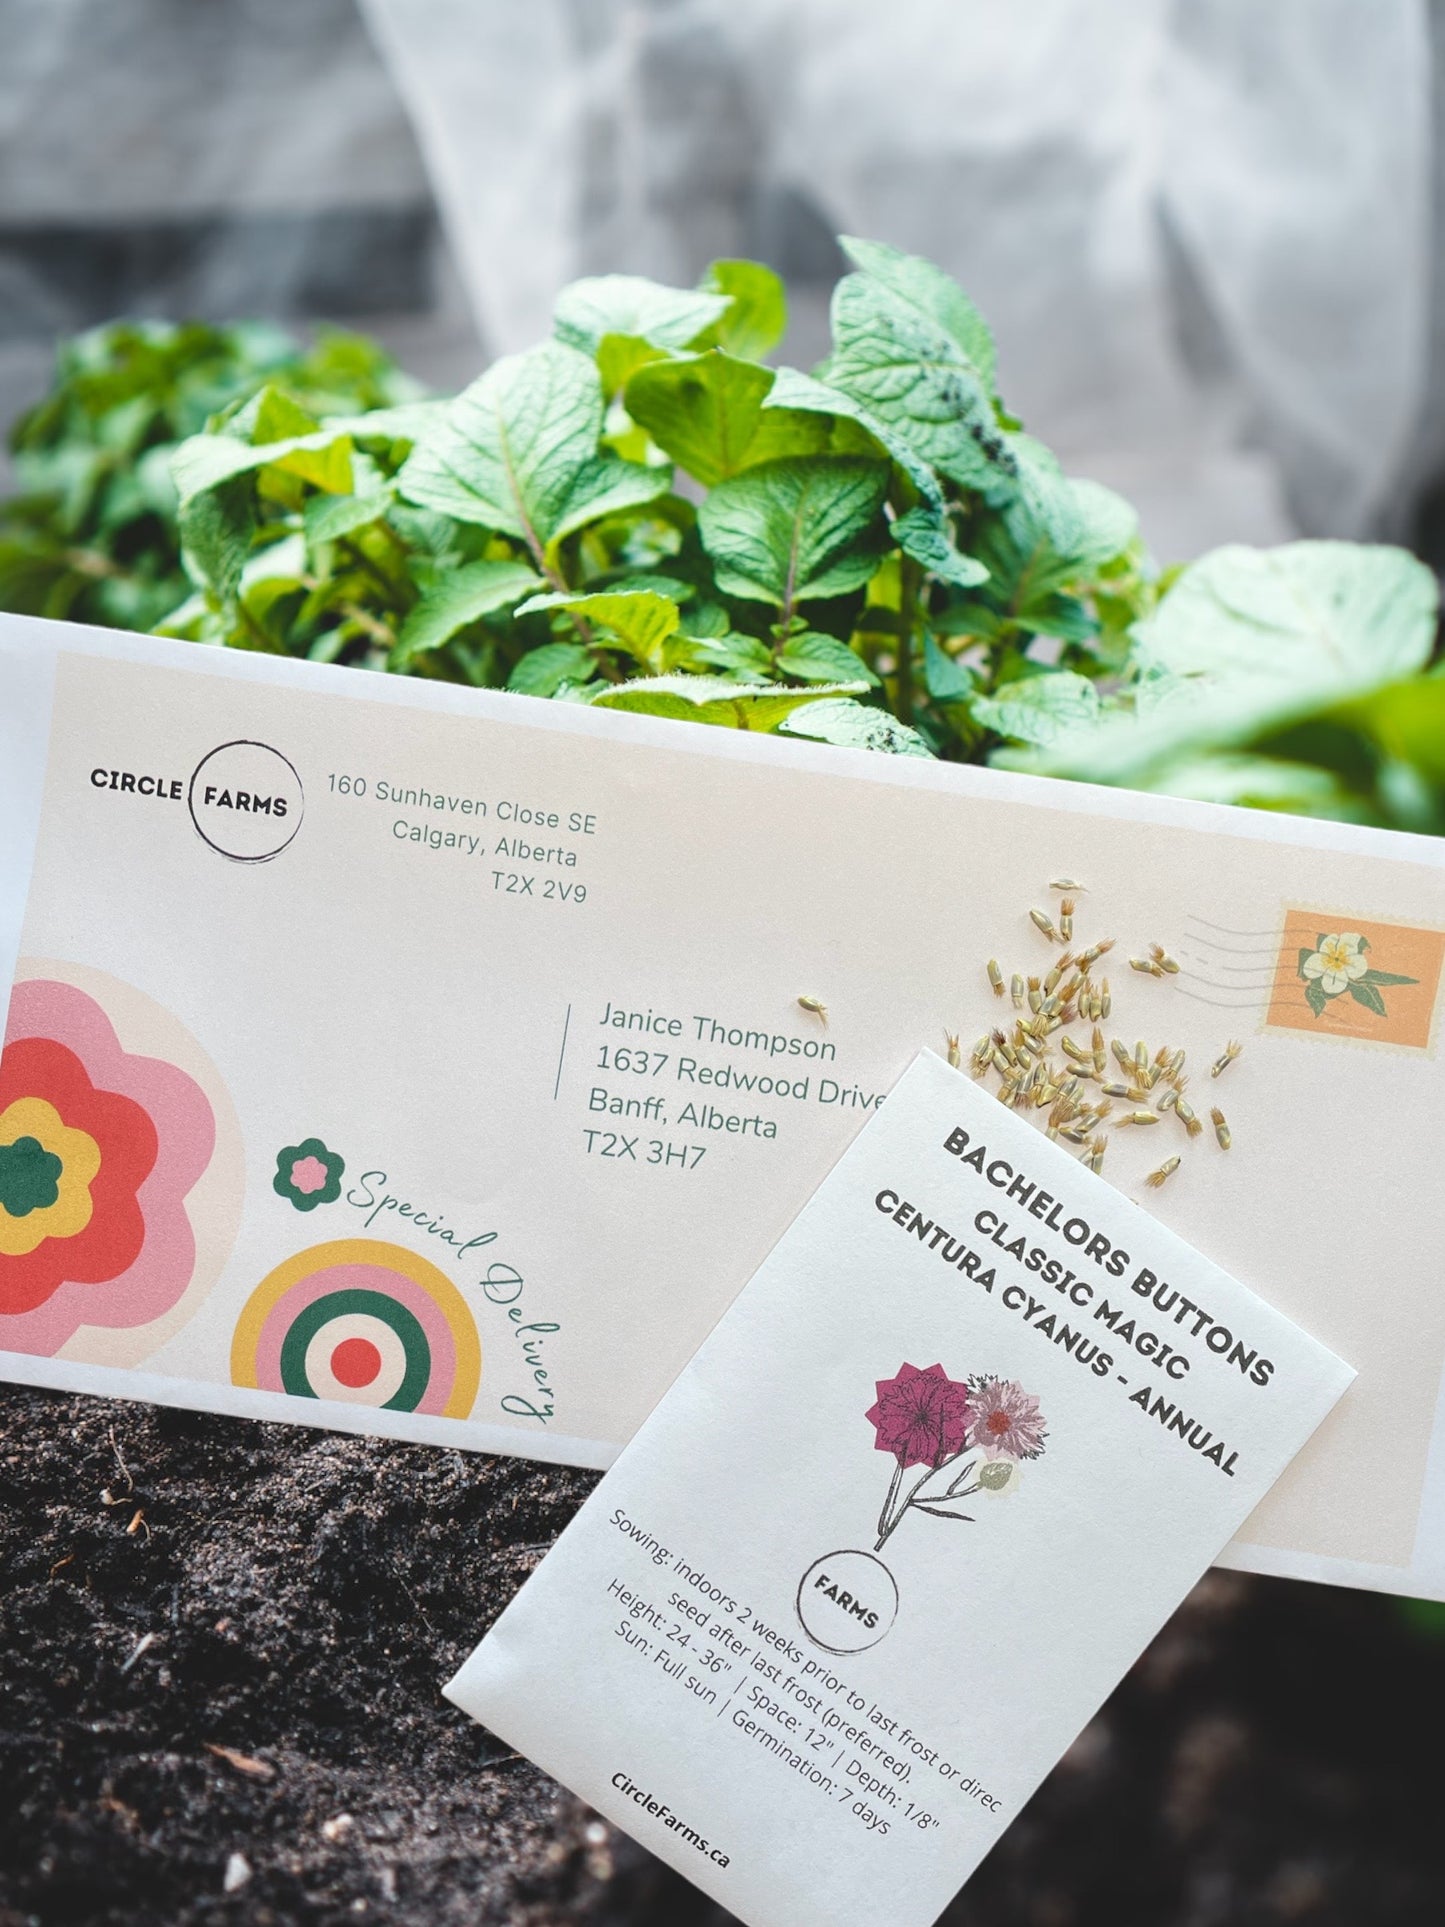 Canadian Seed Subscription - 1 Year Mixed Seeds Gift Subscription